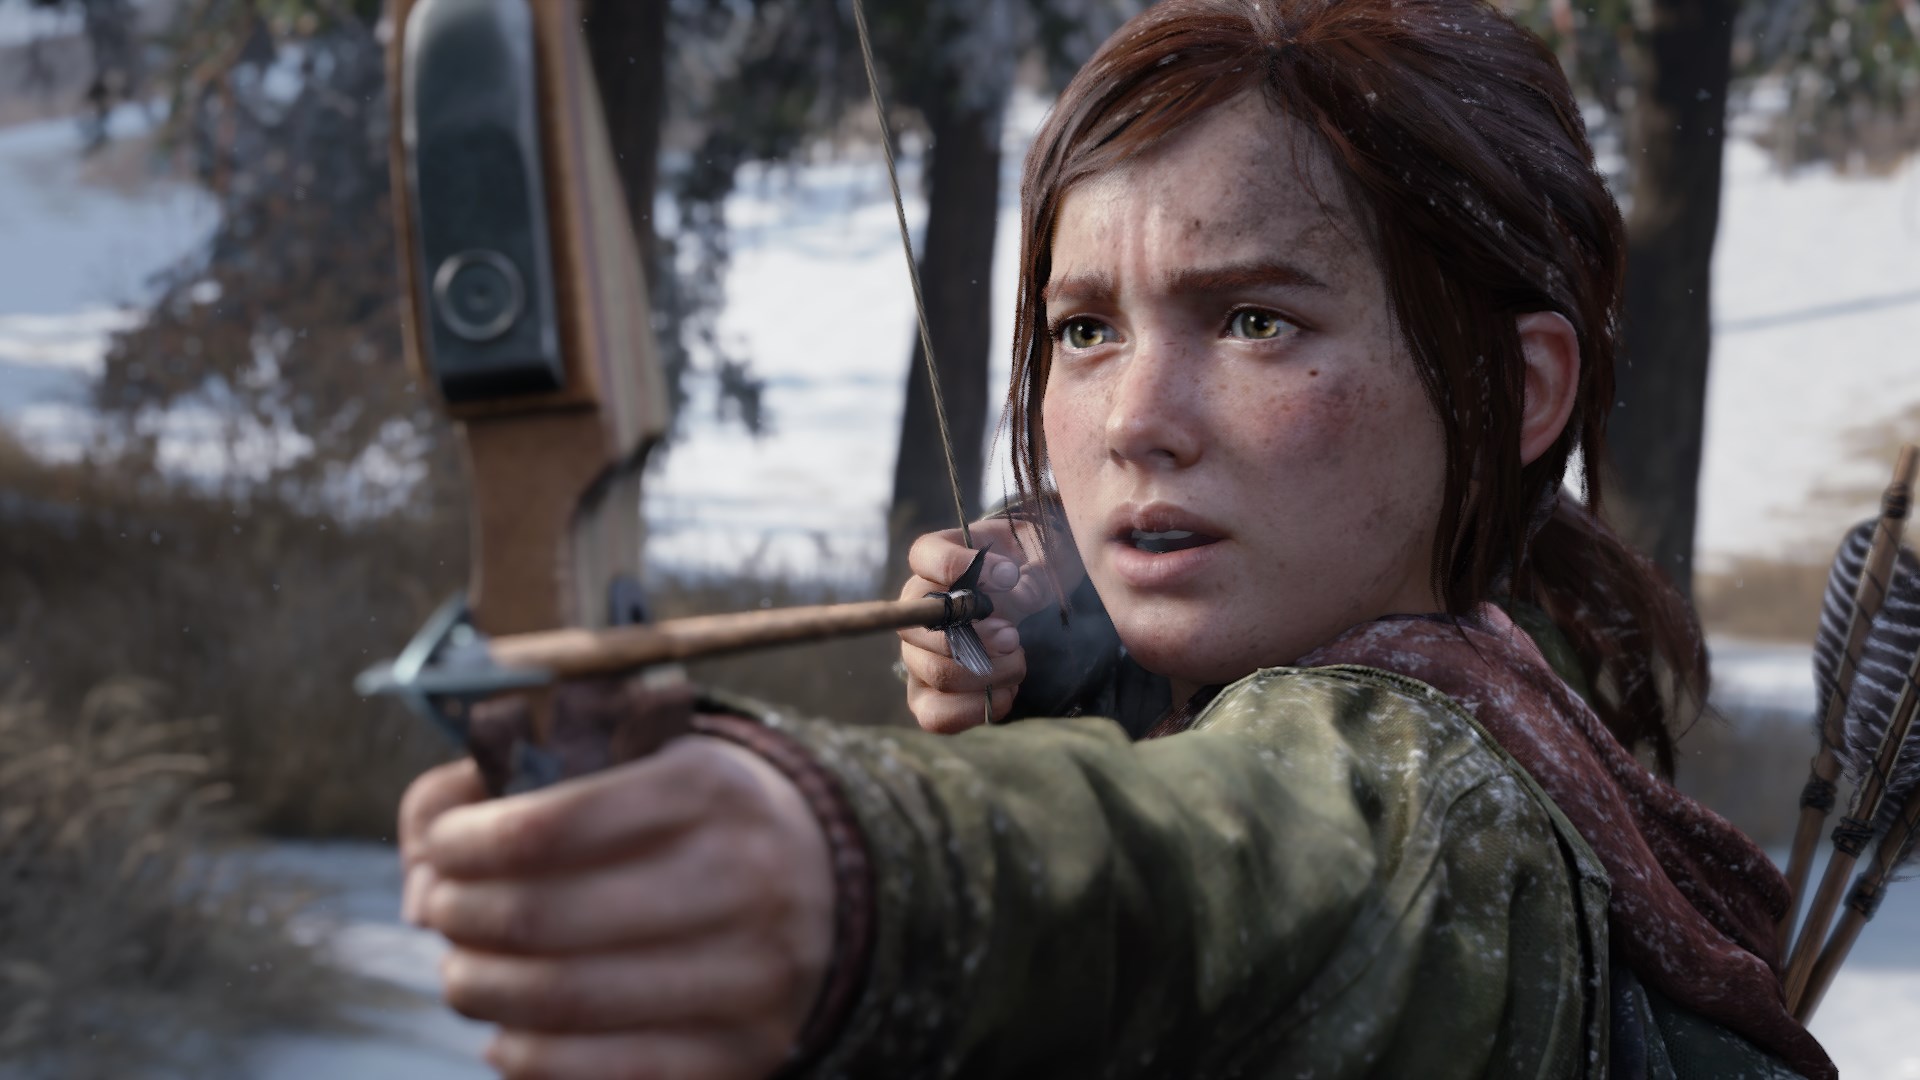 Ellie holding a drawn bow and arrow in The Last of Us Part 1